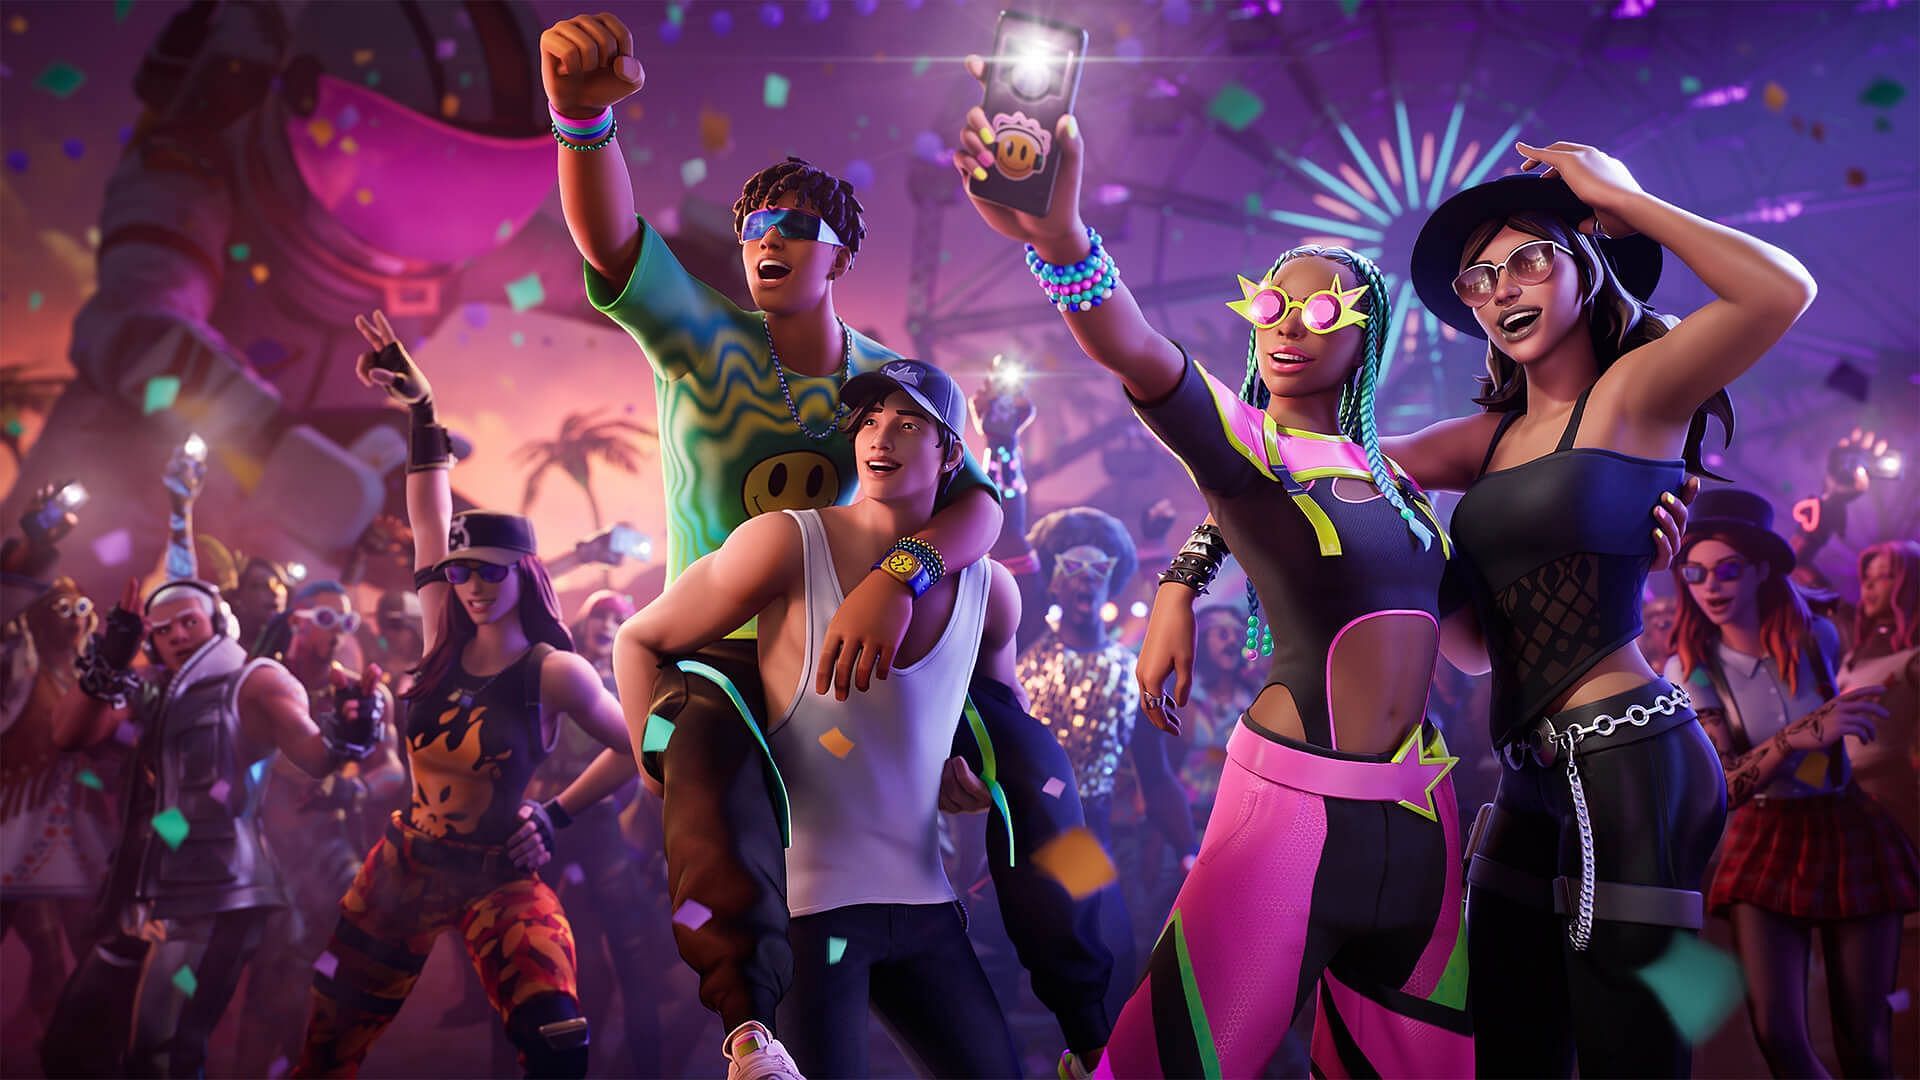 Fortnite Festival Season 1 Battle Pass to supposedly cost 1,800 V-Bucks, not part of Crew Pack